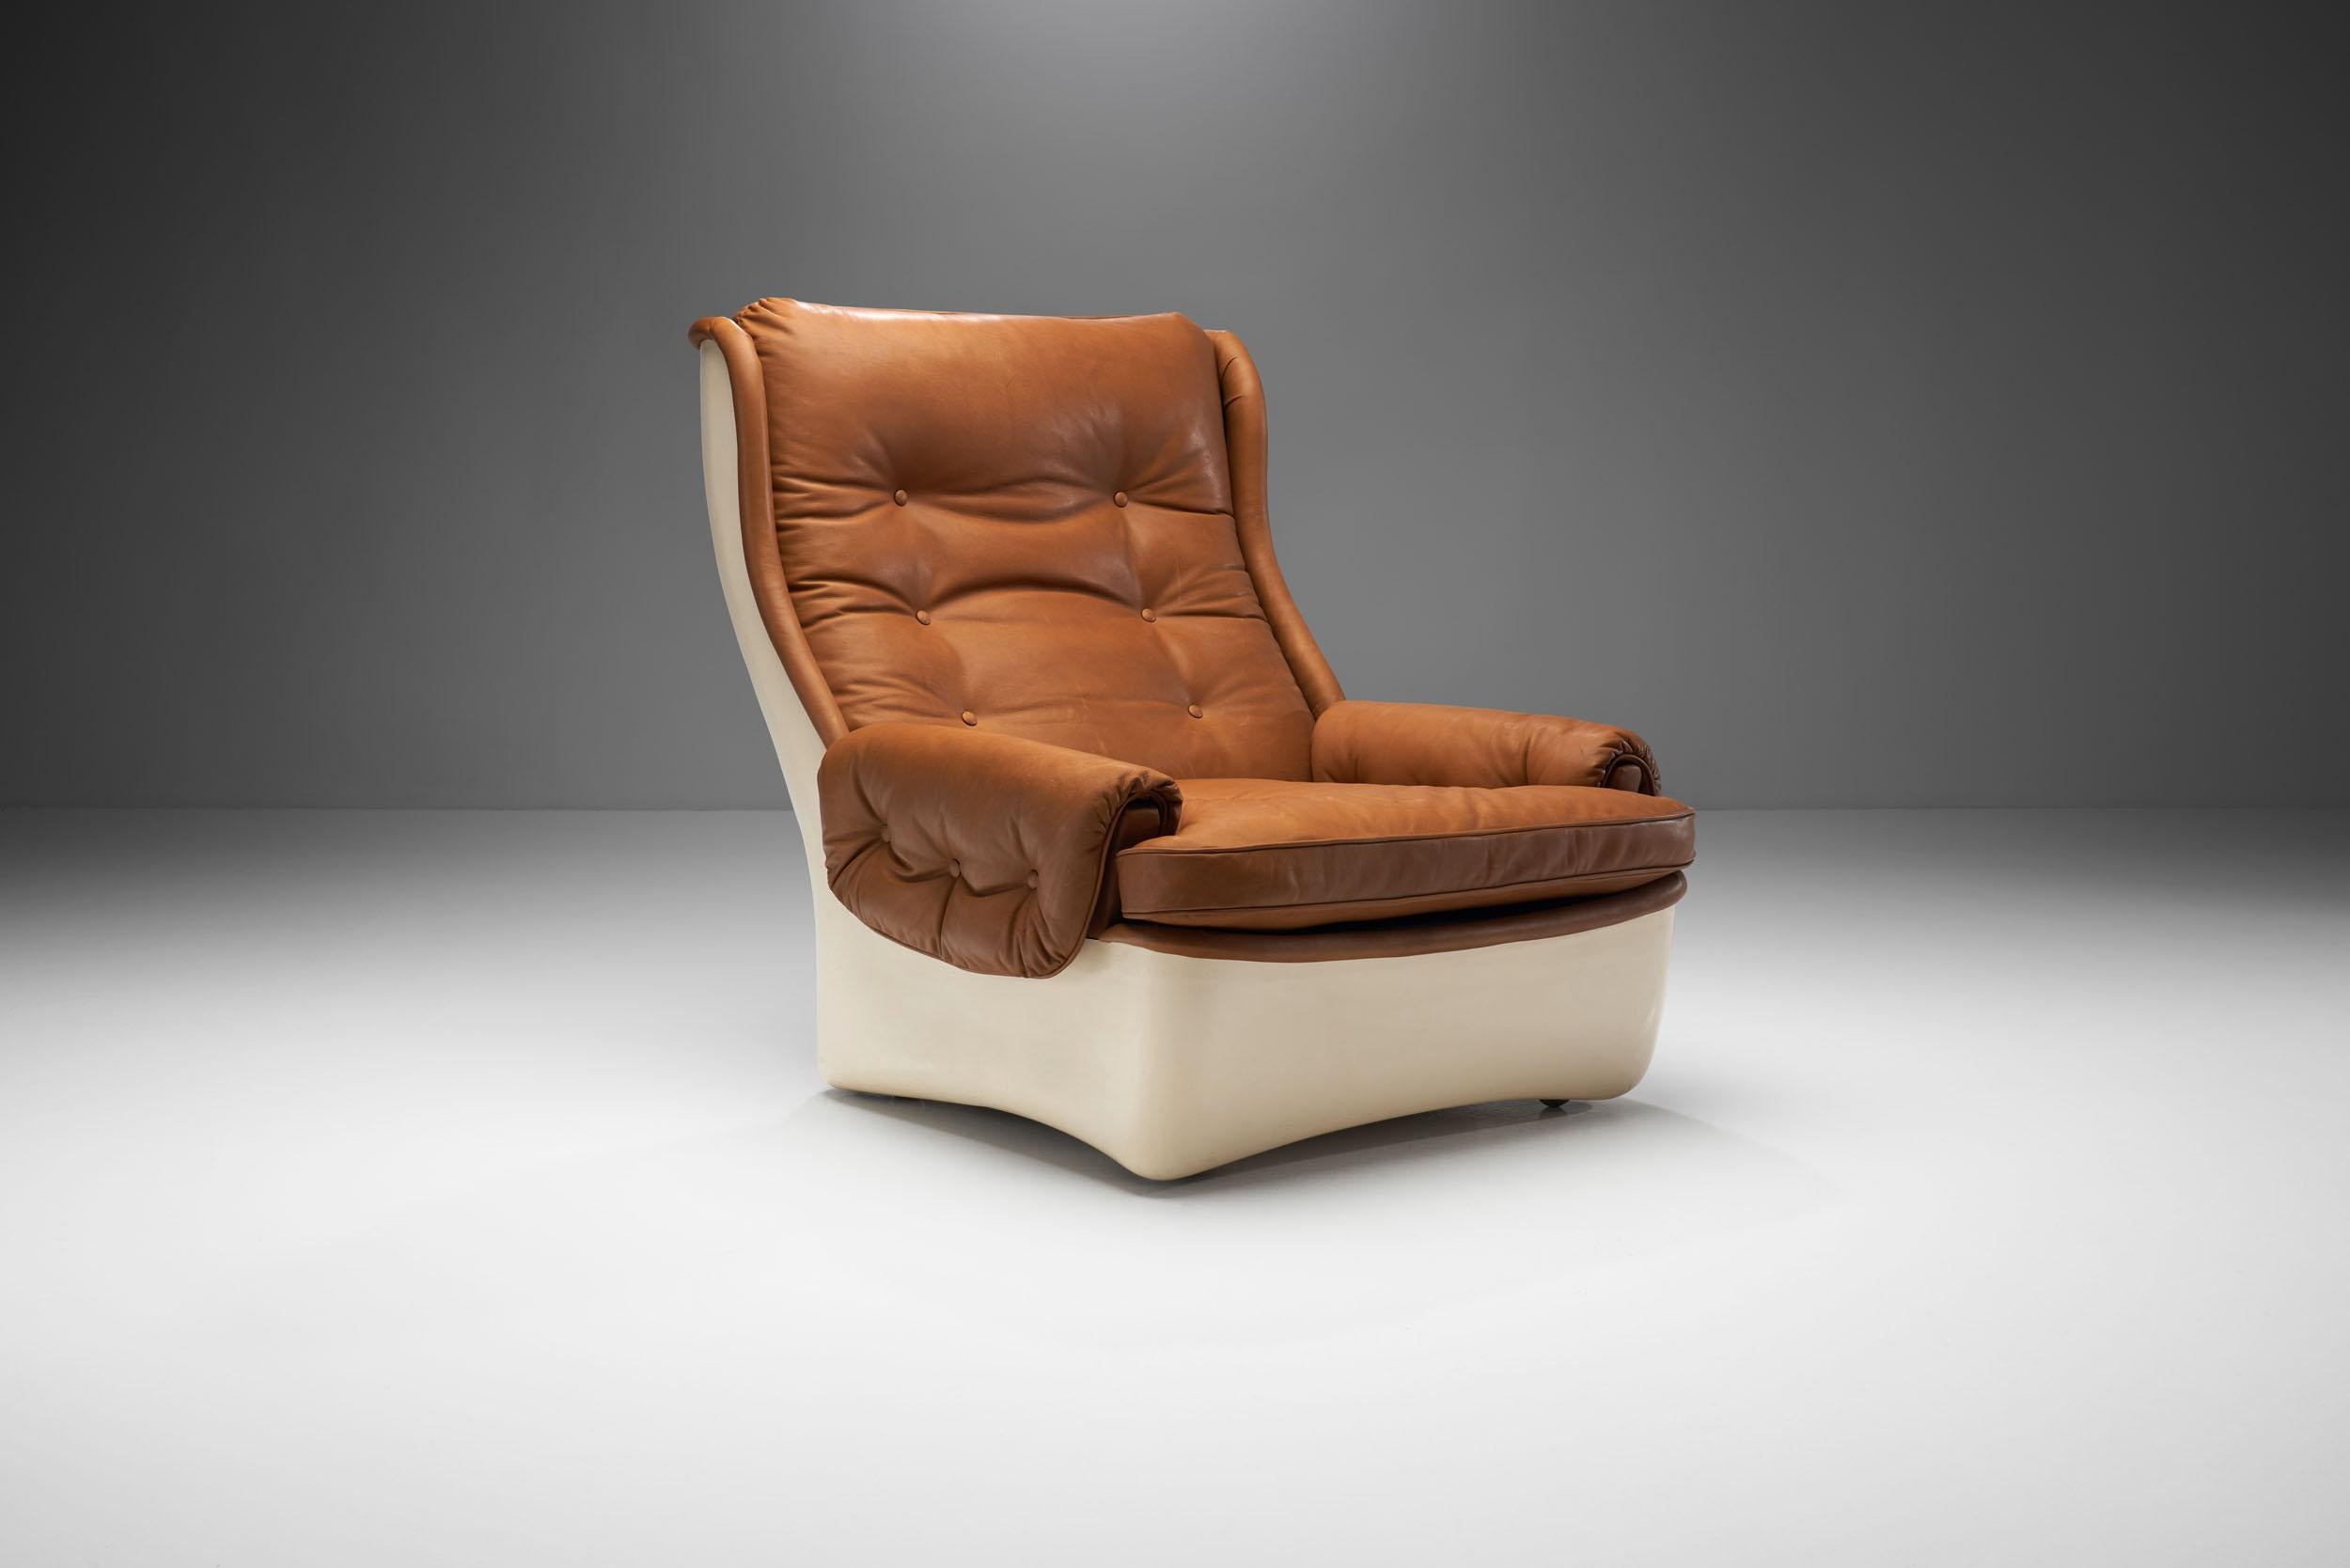 This large fiberglass lounge chair, the “Orchidée” was one of the Cadestin models that were ordered by the Centre Pompidou Museum. The design dates to 1968 and was manufactured by Airborne International.

This chair stands out both in terms of size,